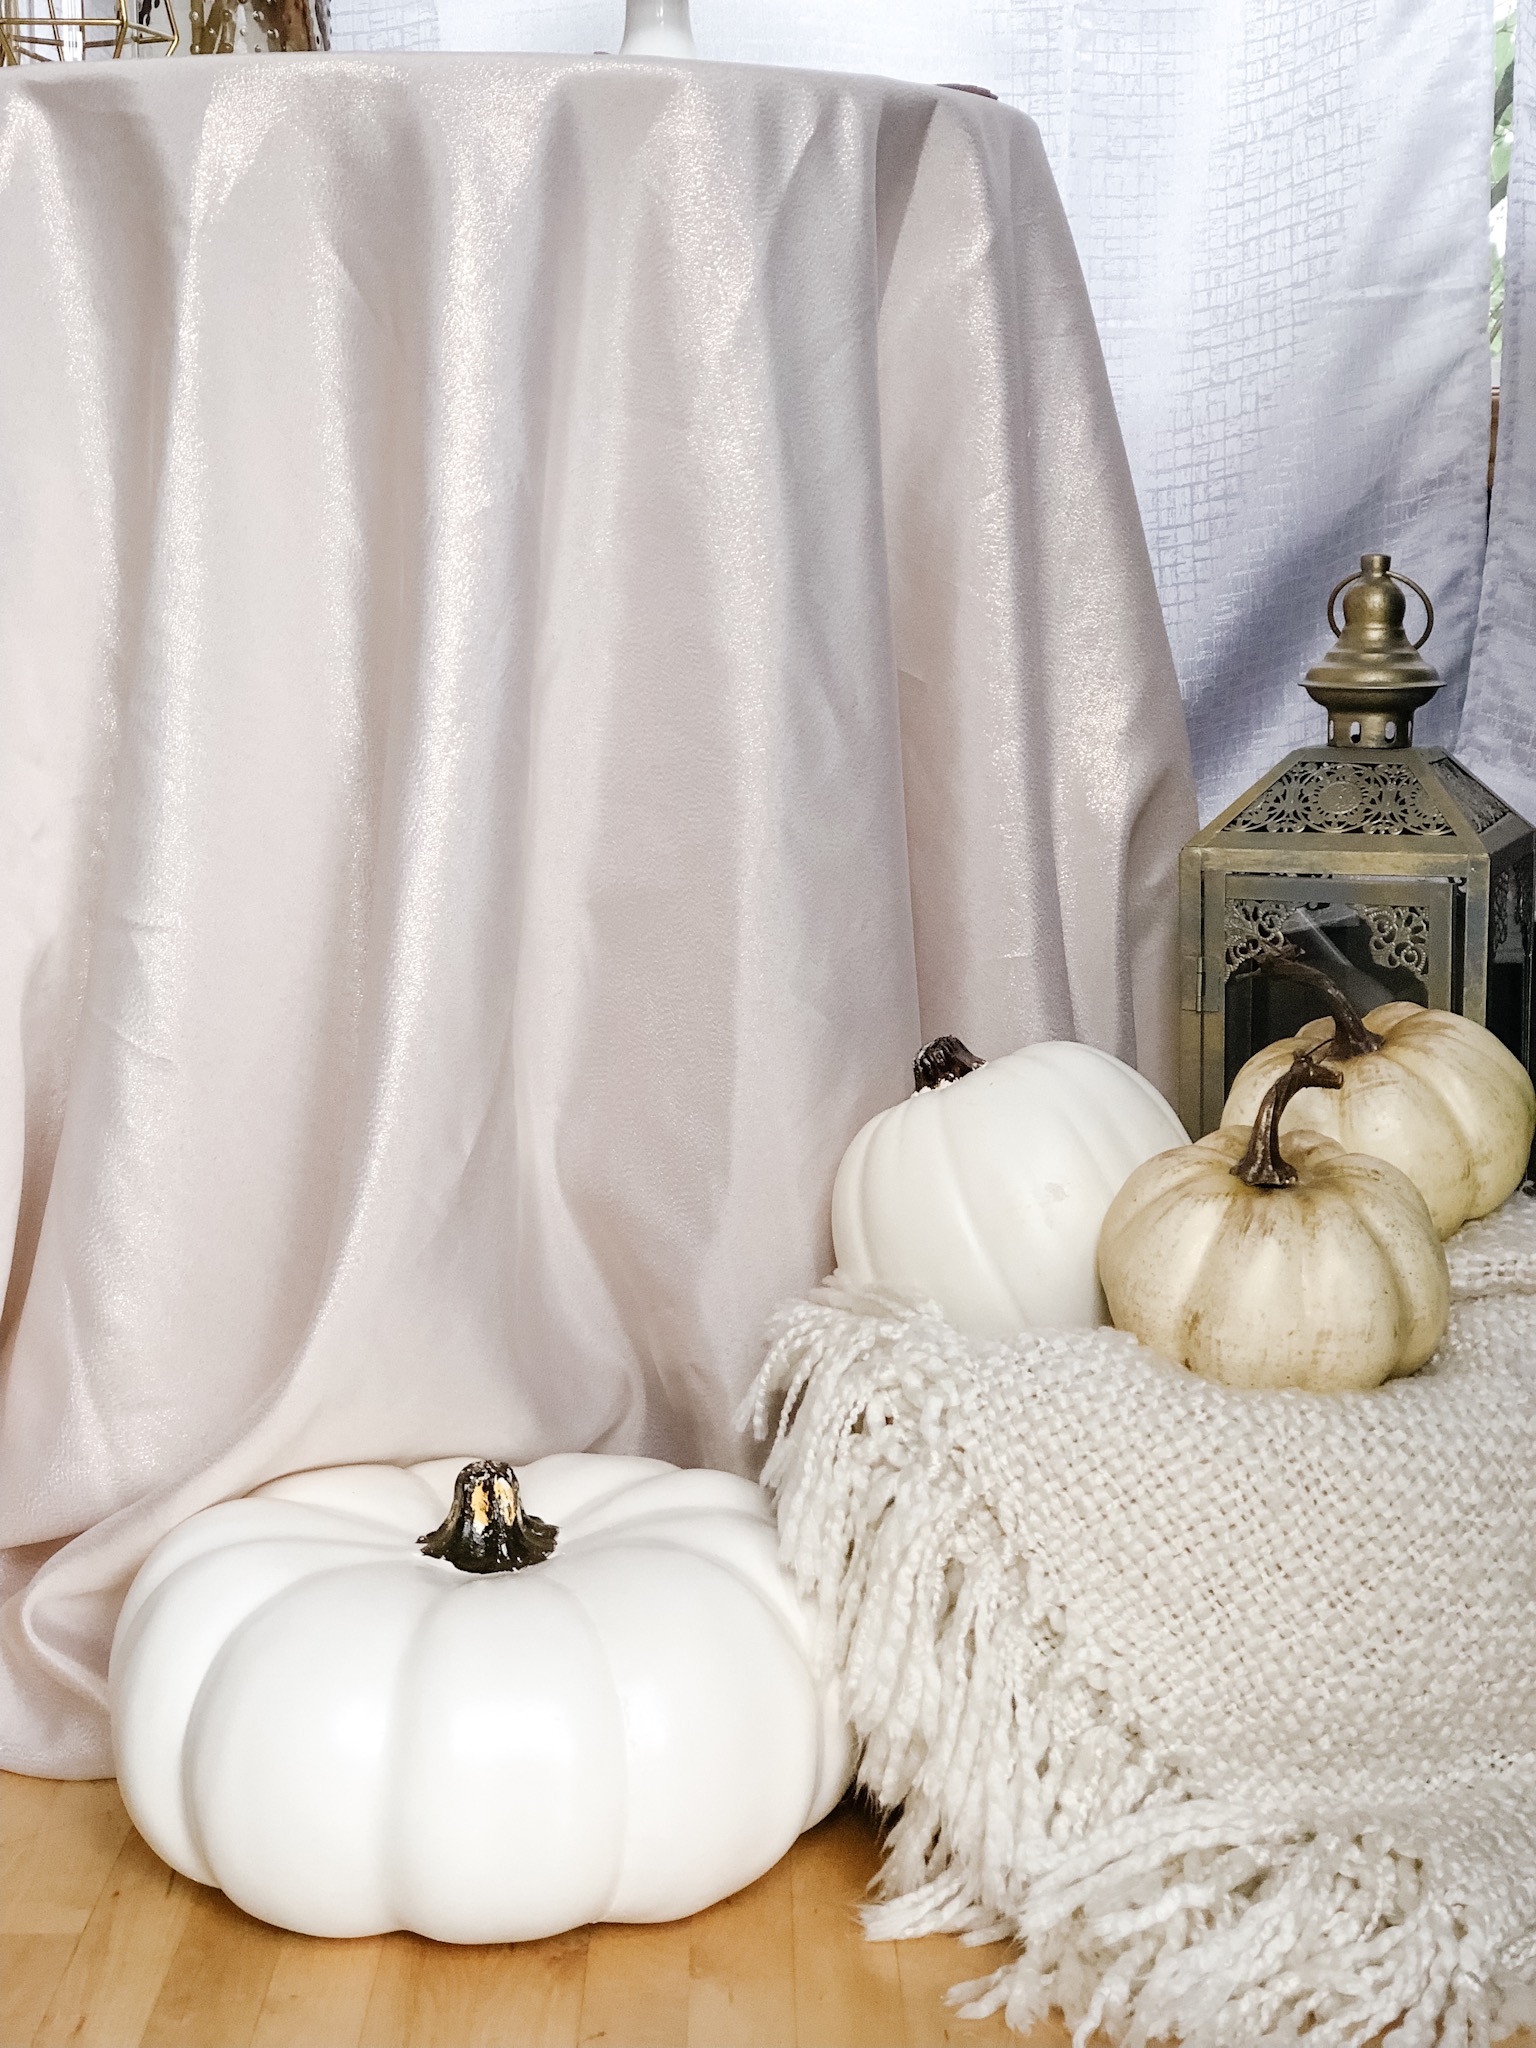 5 Ways Under $30 to Decorate Your Home for Fall - on the Bronte Bride Blog